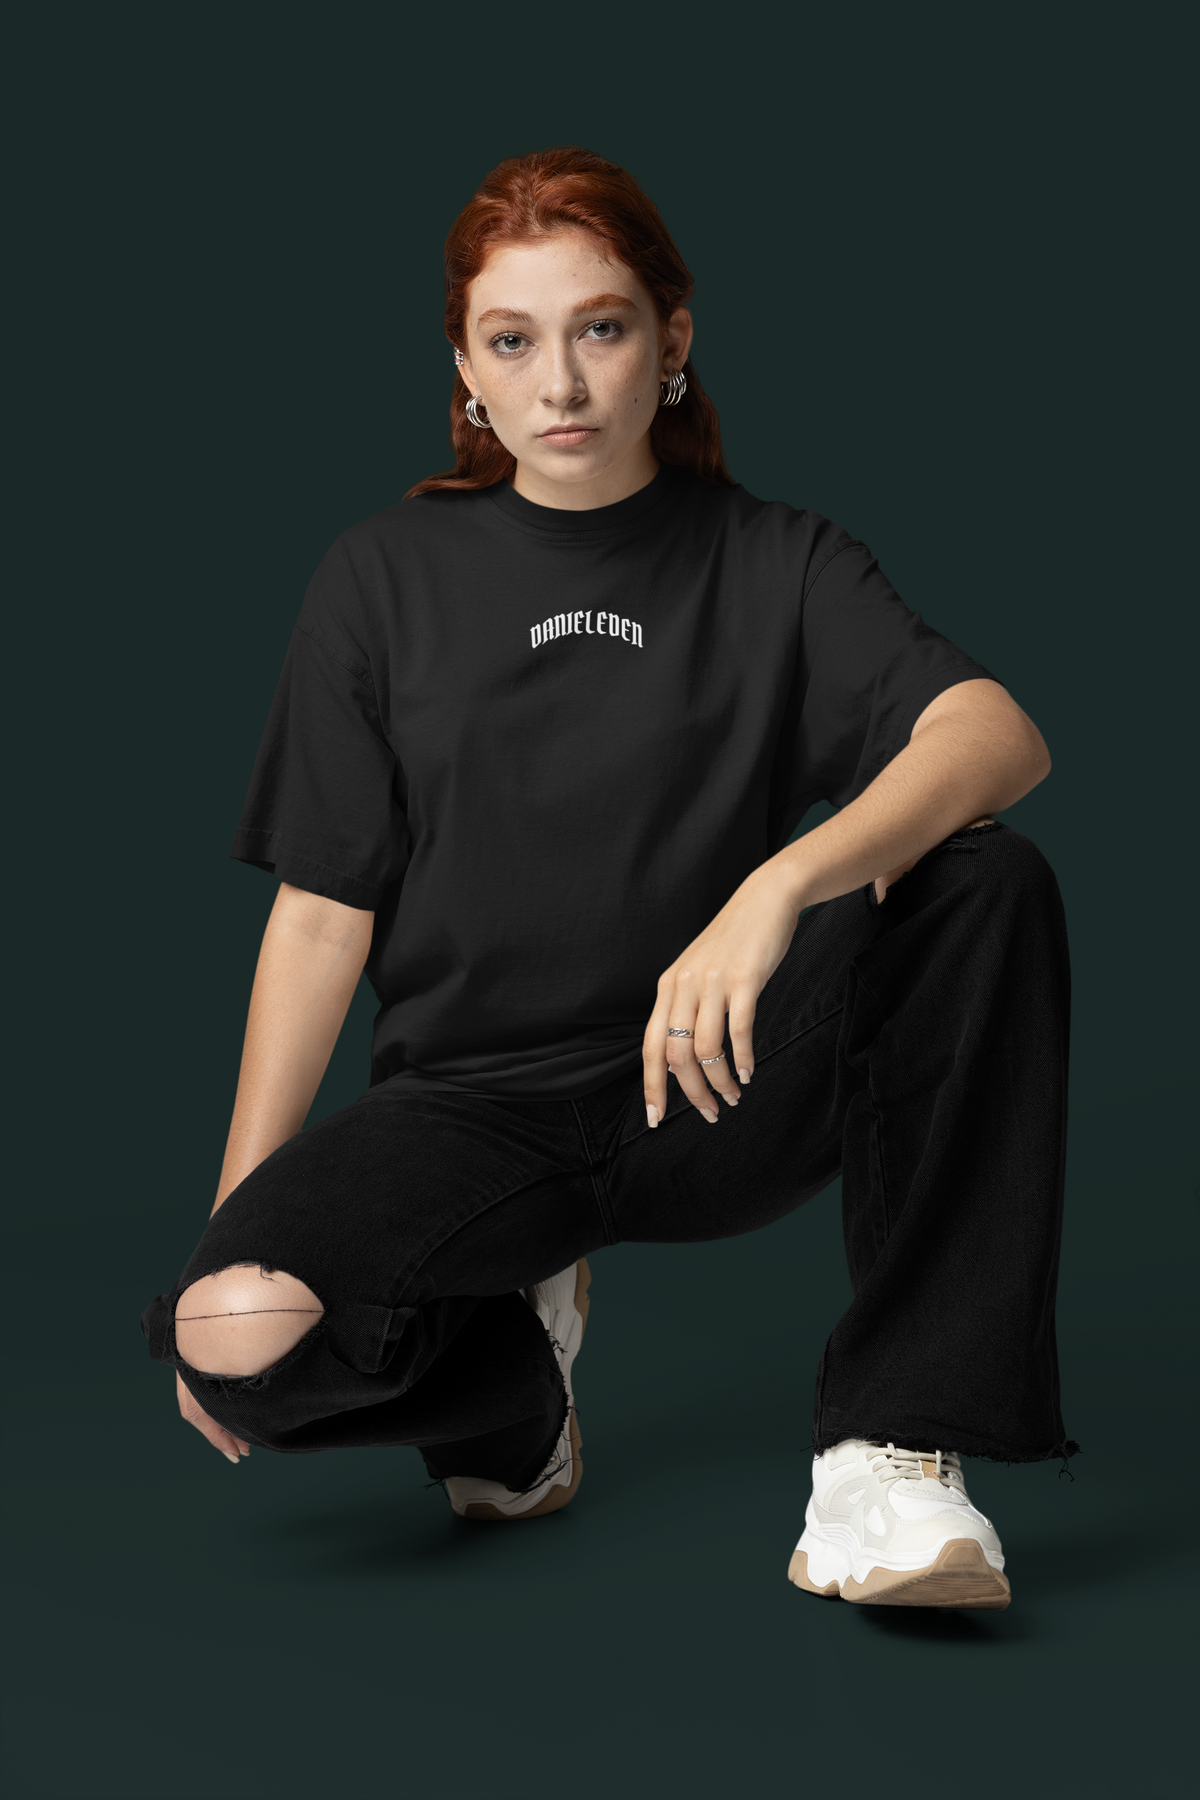 DanielEden Oversized faded t-shirt for woman " Lifting "